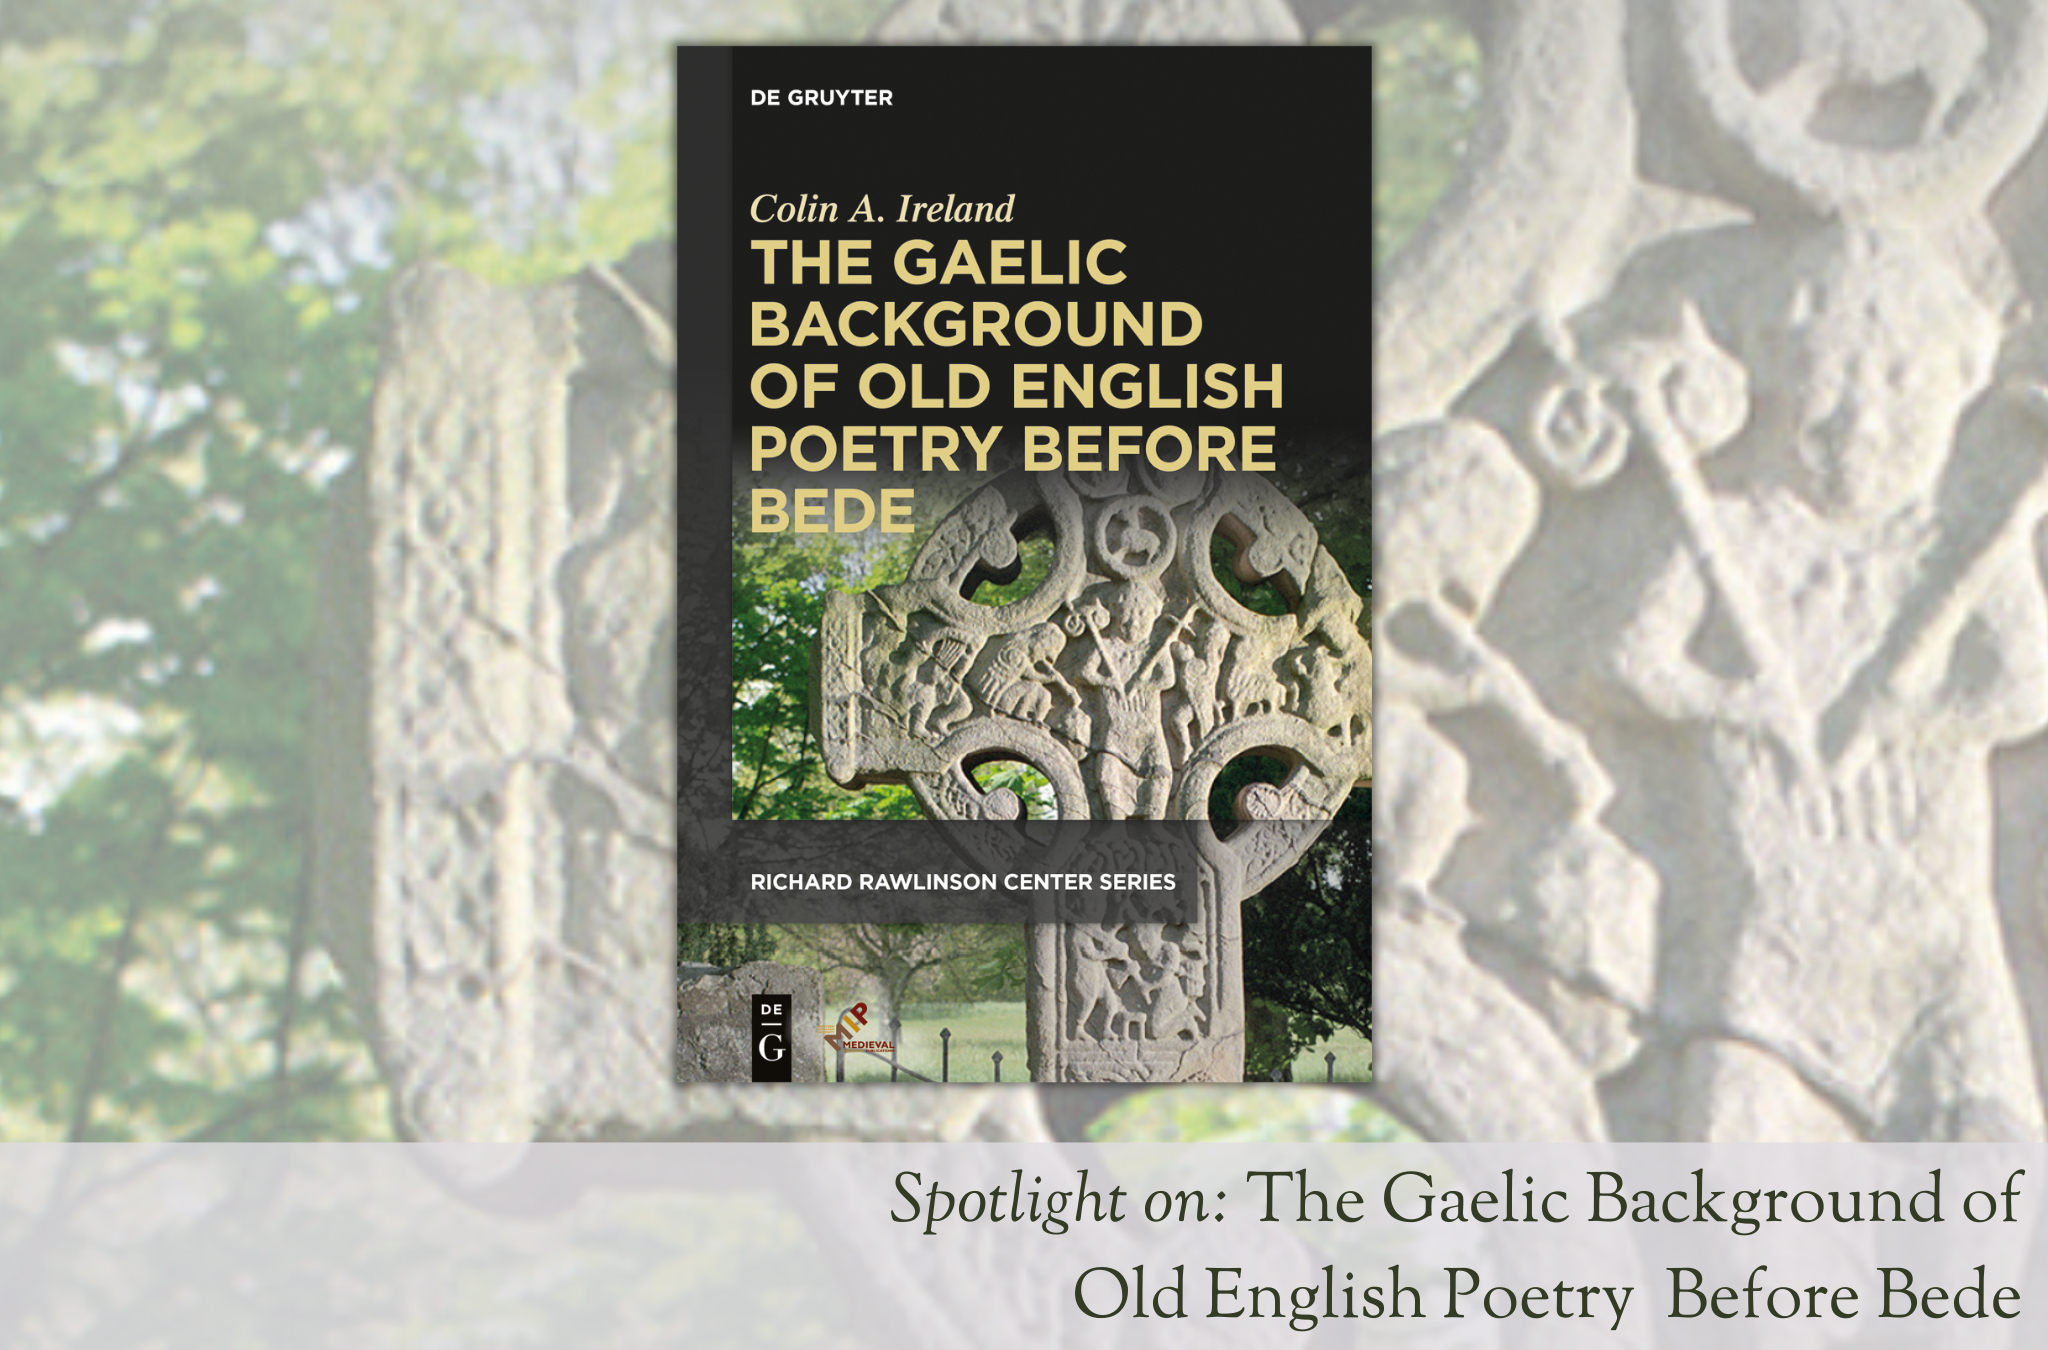 The cover image of The Gaelic Background of Old English Poetry Before Bede, by Colin Ireland: Cover image of The Gaelic Background of Old English Poetry Before Bede: a carved stone Celtic cross, in front of a leafy background, with the title in tan on a black background.